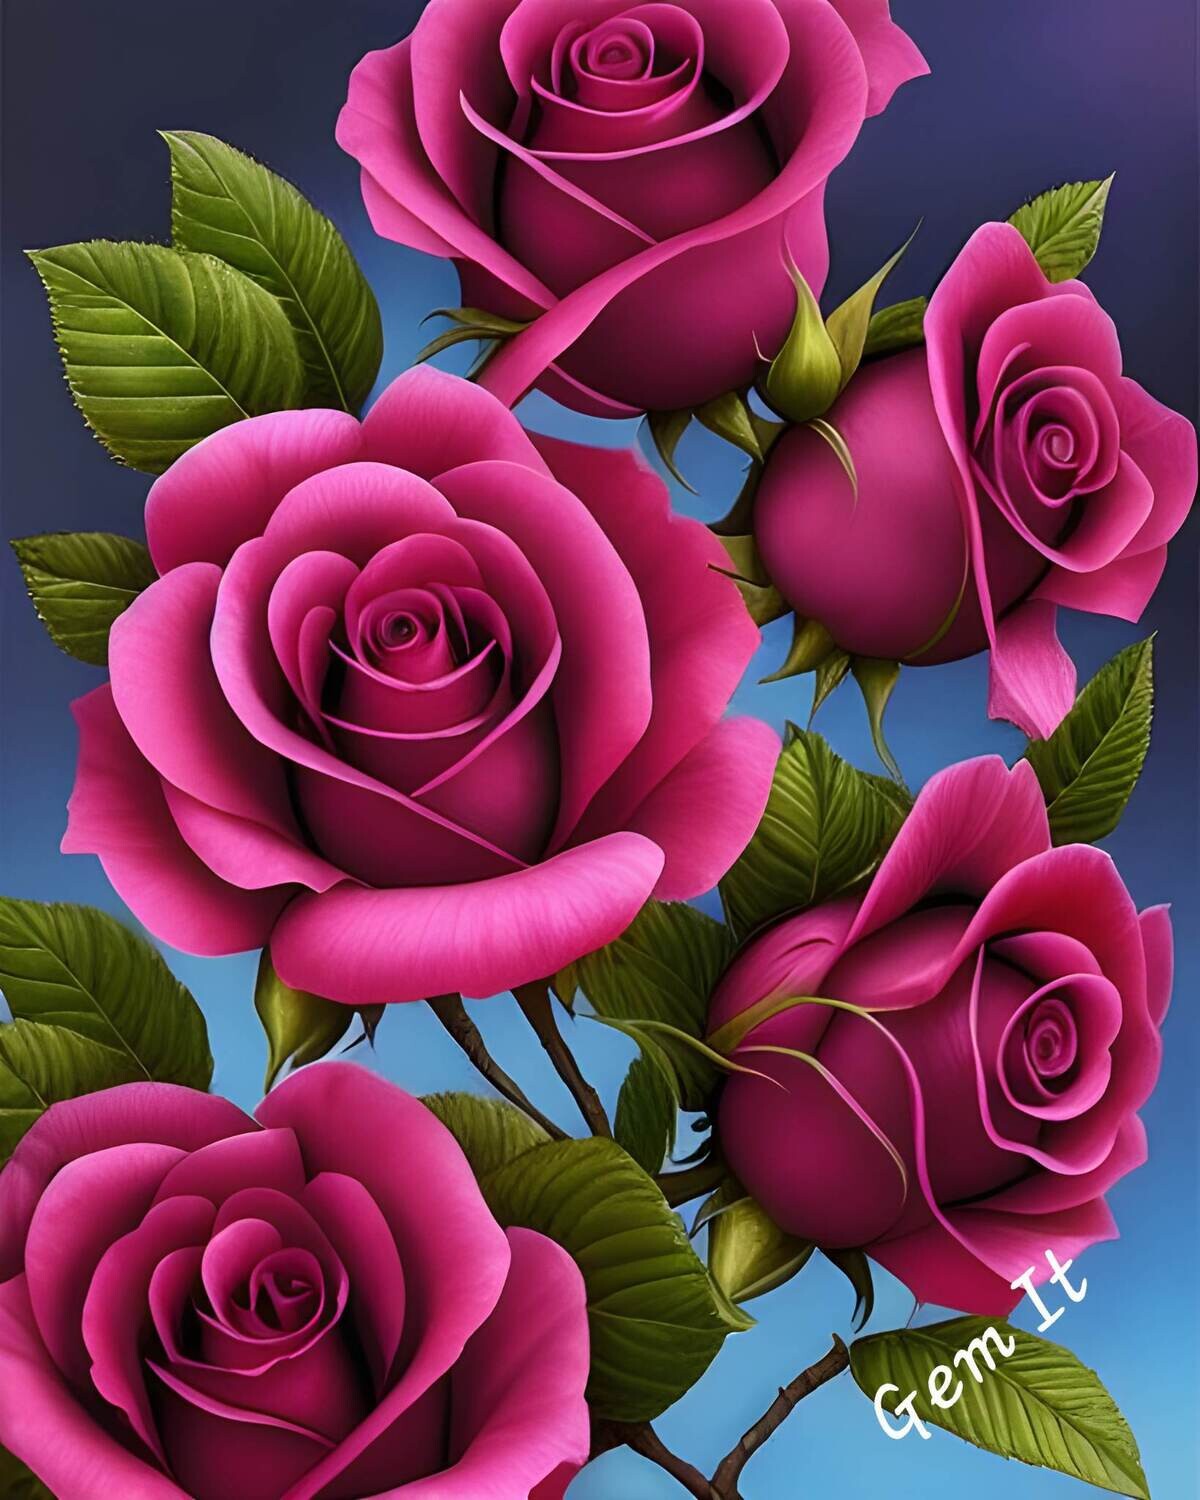 Roses Cerise 1 - Specially ordered for you. Delivery is approximately 4 - 6 weeks.